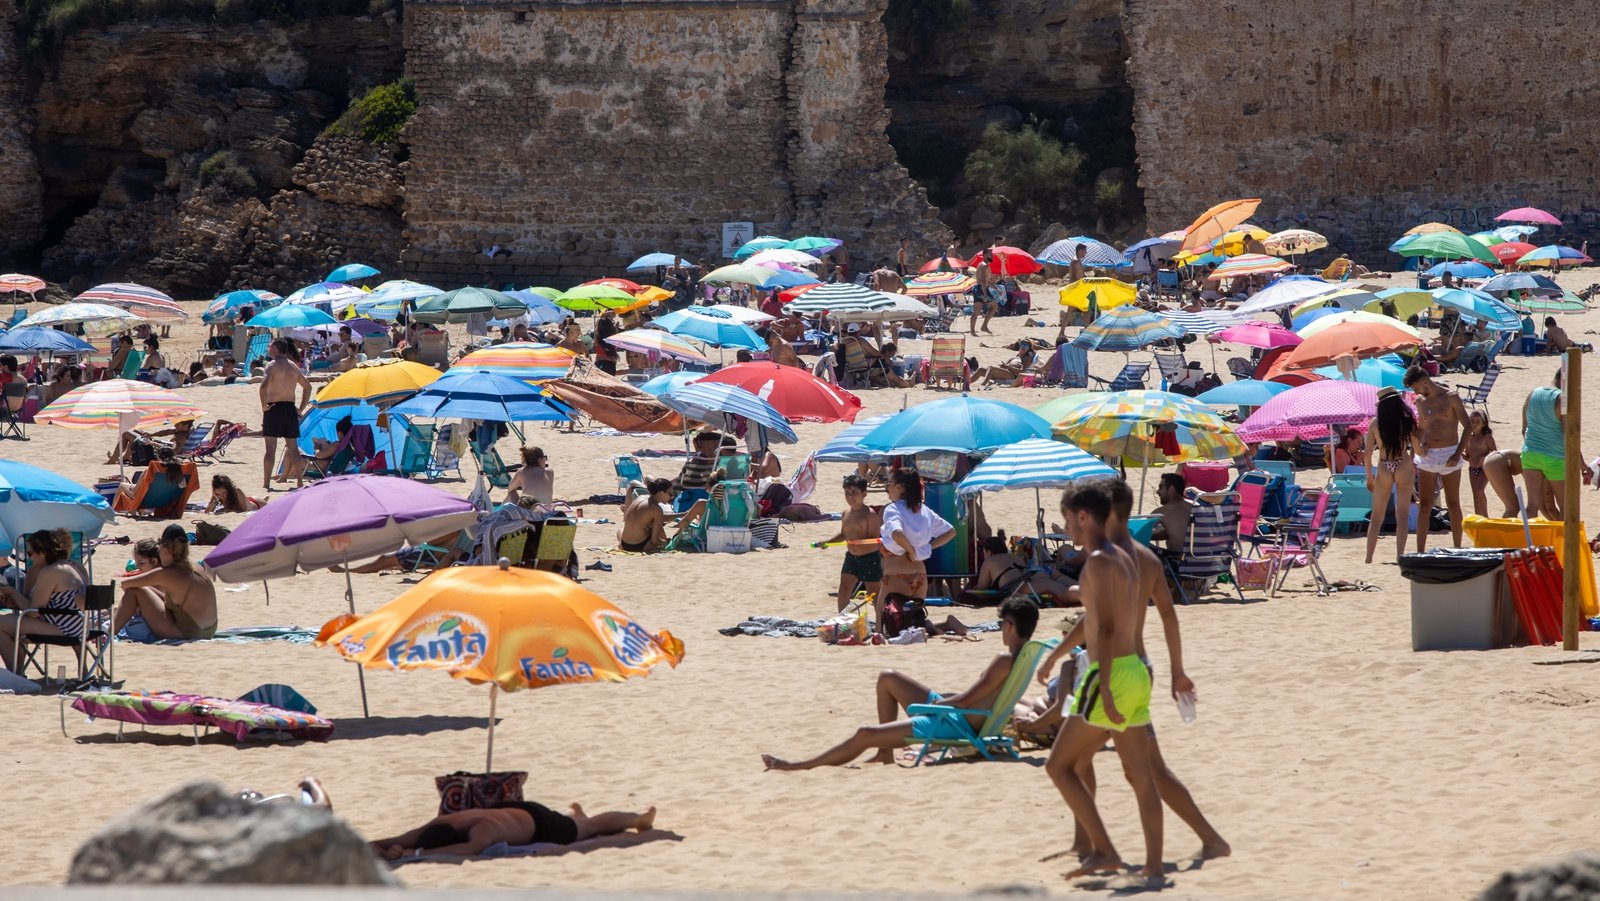 Spain, France unlikely to make travel 'green' list thumbnail